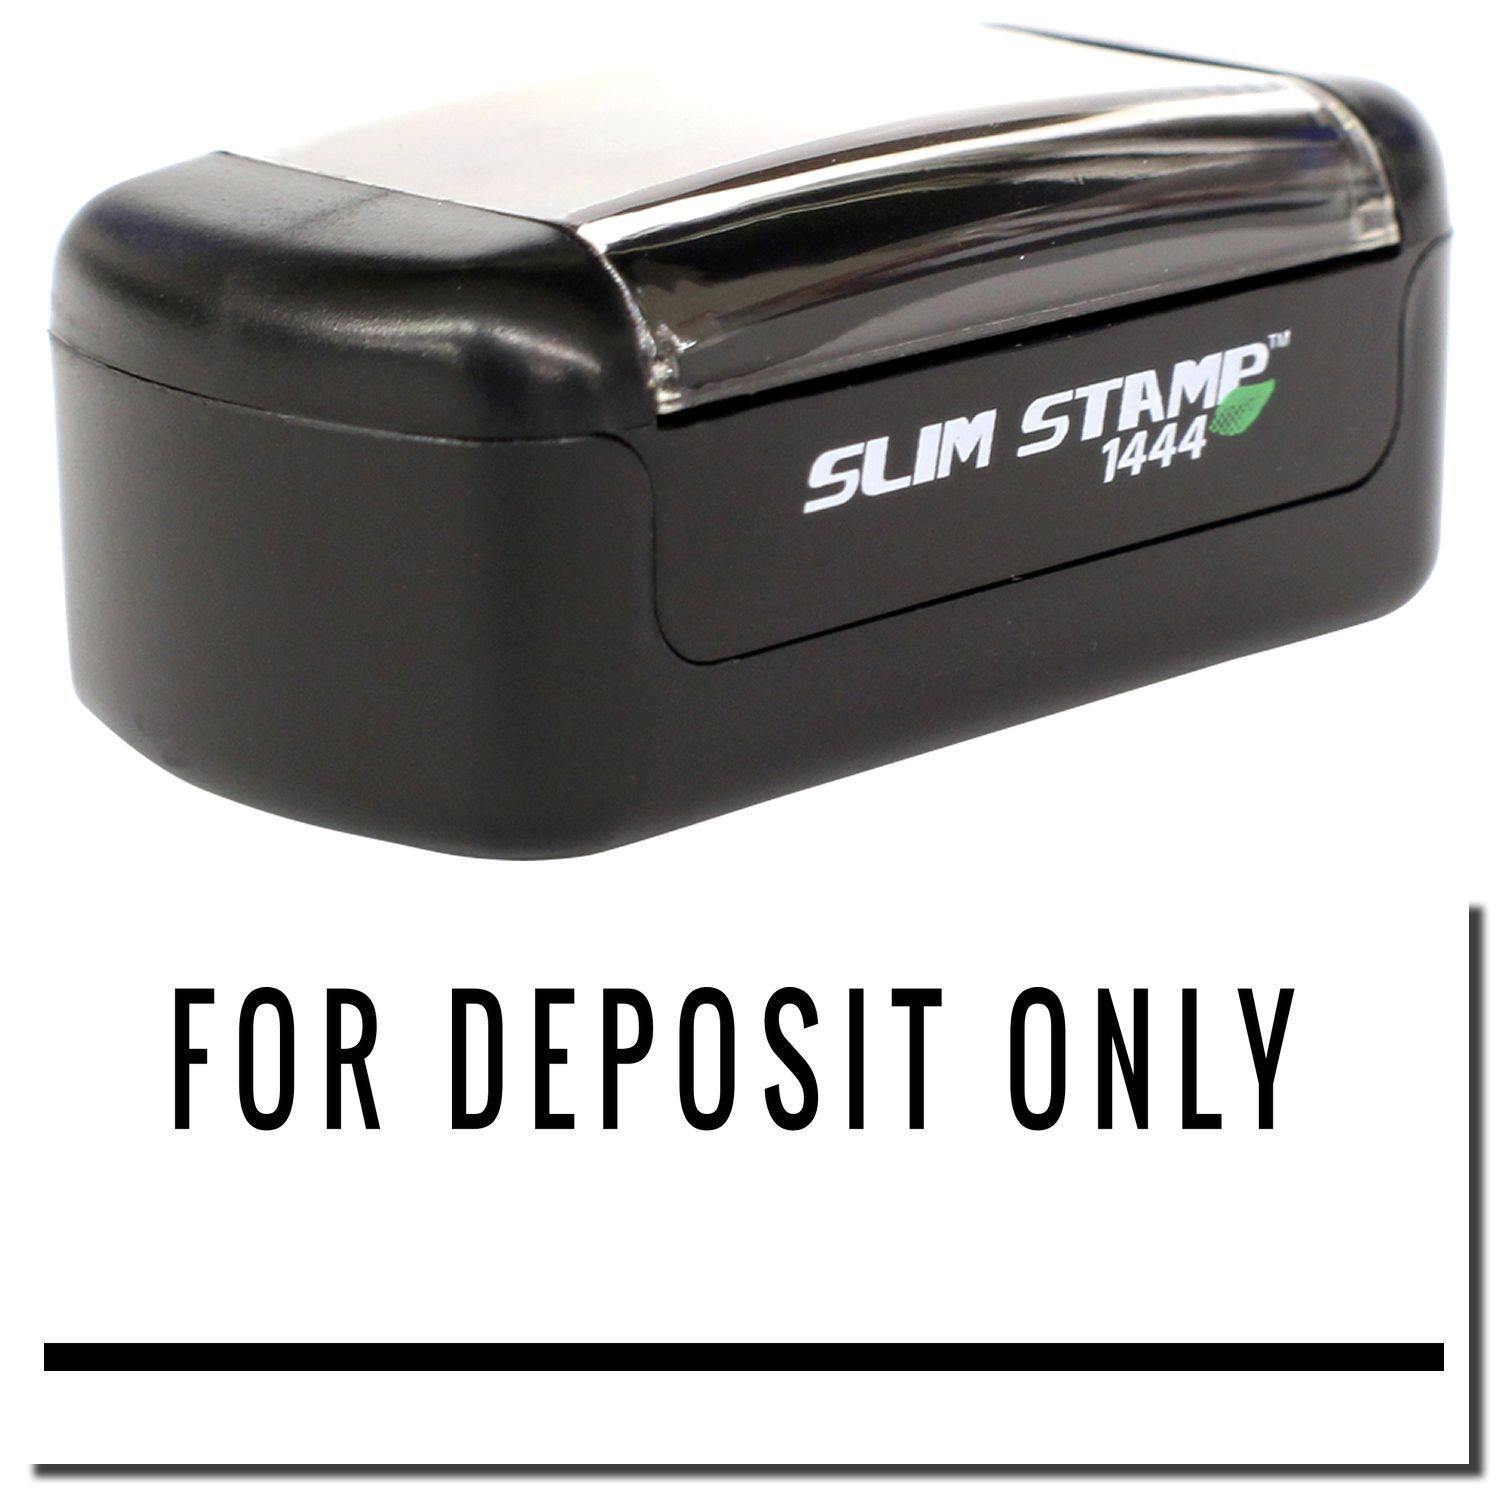 A stock office pre-inked stamp with a stamped image showing how the text "FOR DEPOSIT ONLY" with a line underneath the text is displayed after stamping.